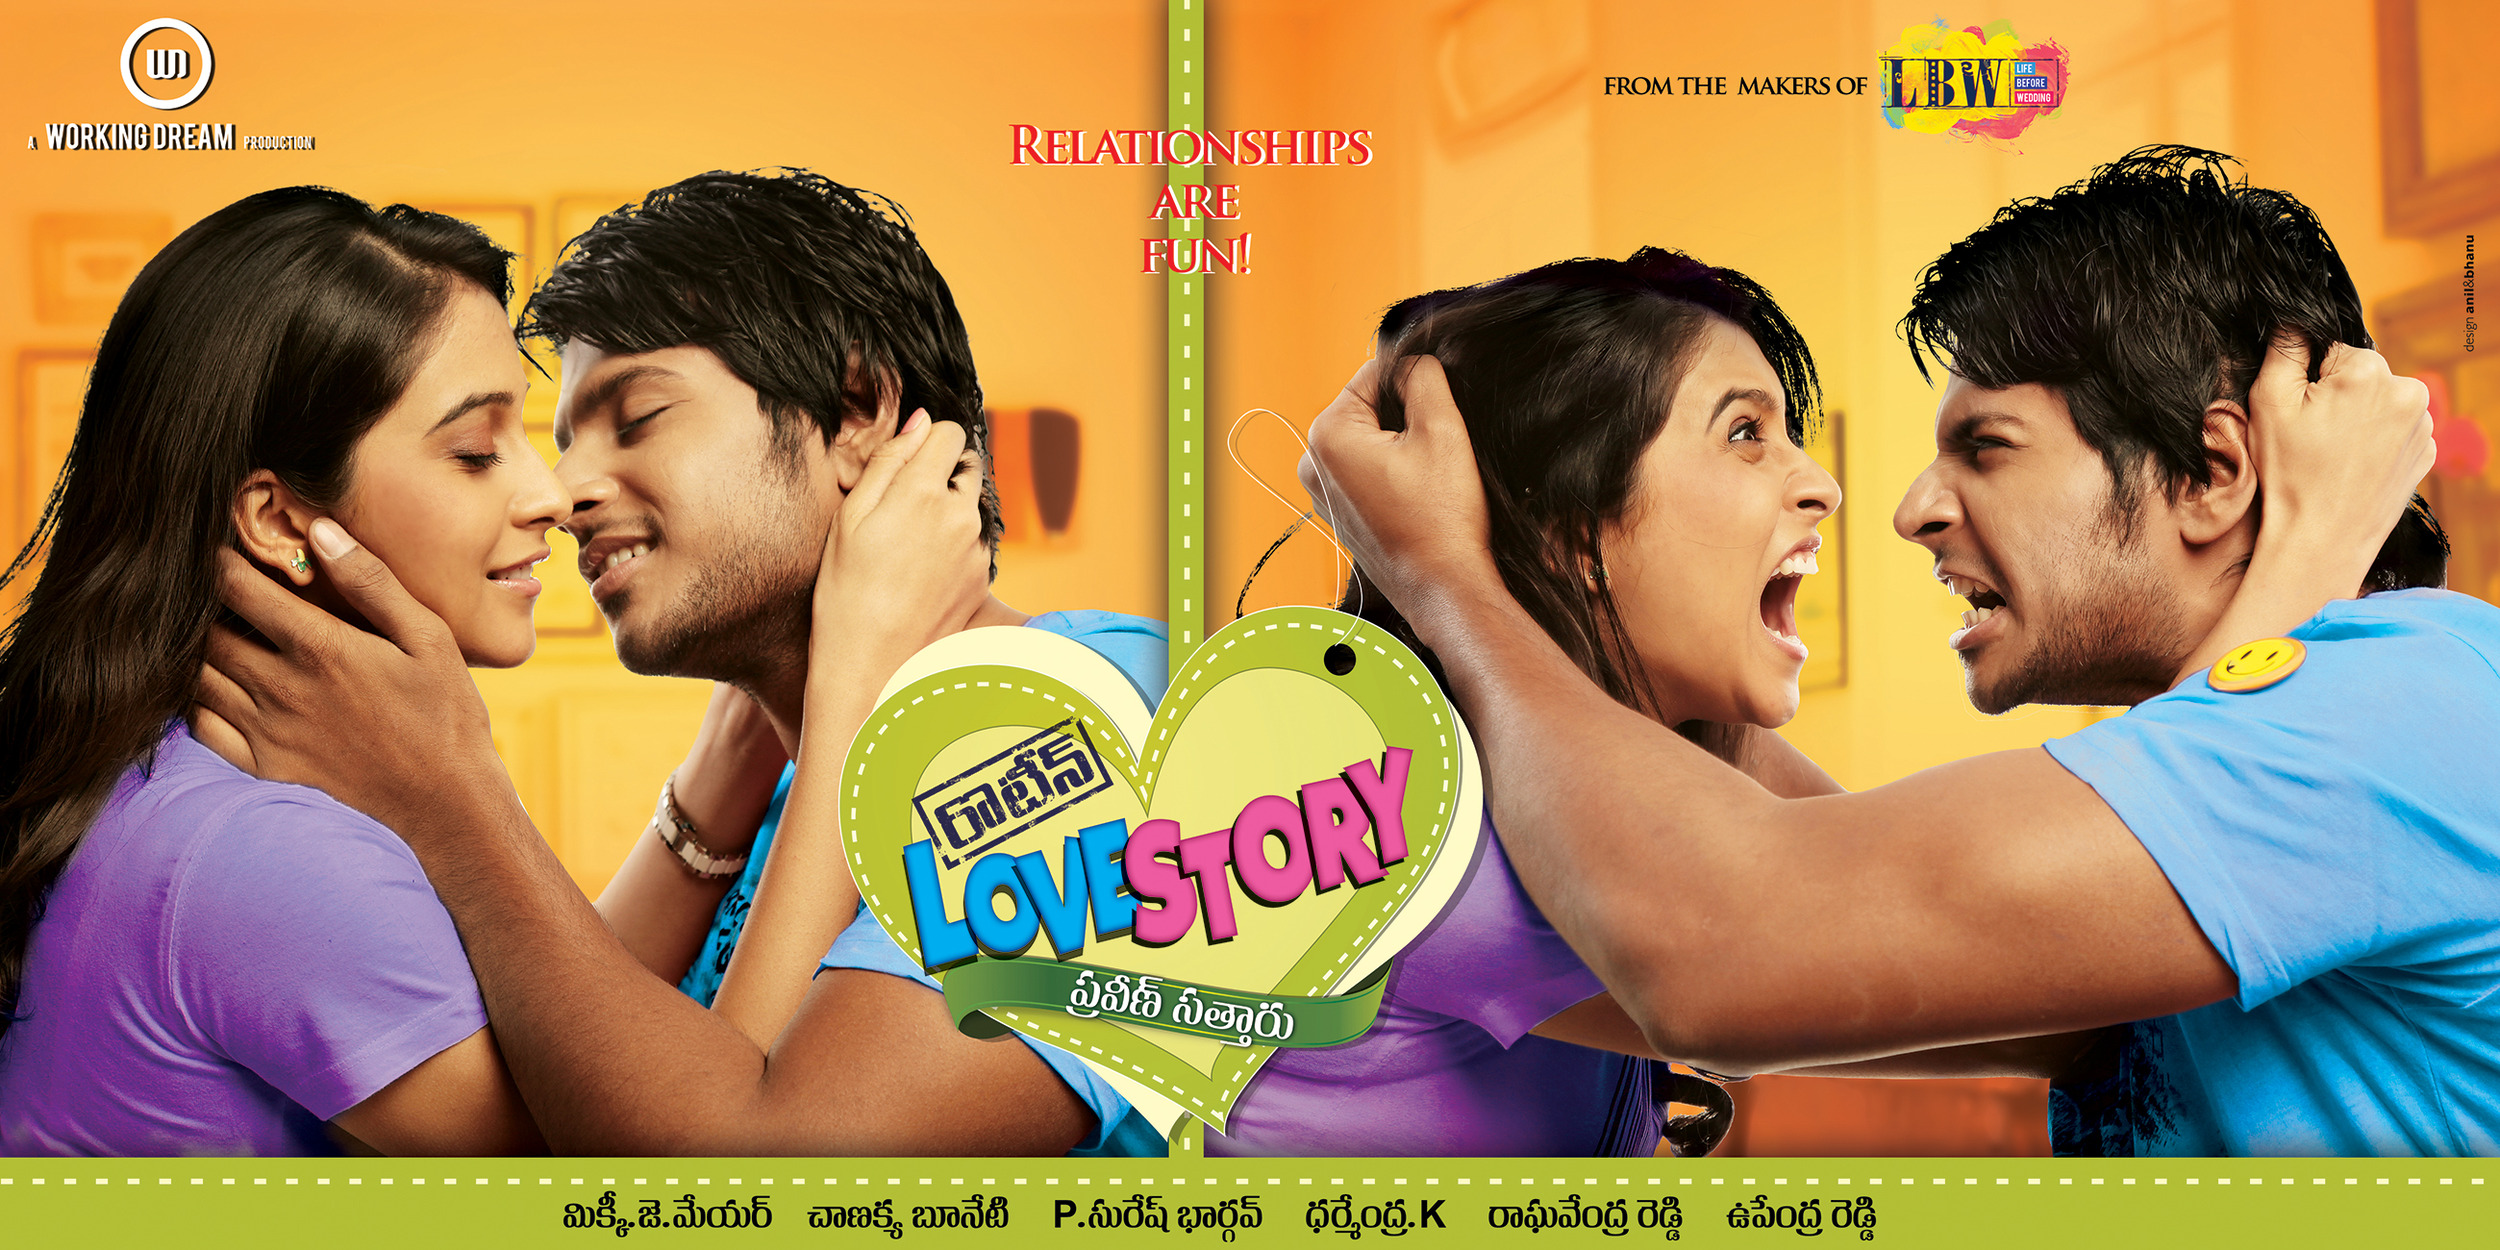 Mega Sized Movie Poster Image for Routine Love Story (#16 of 16)